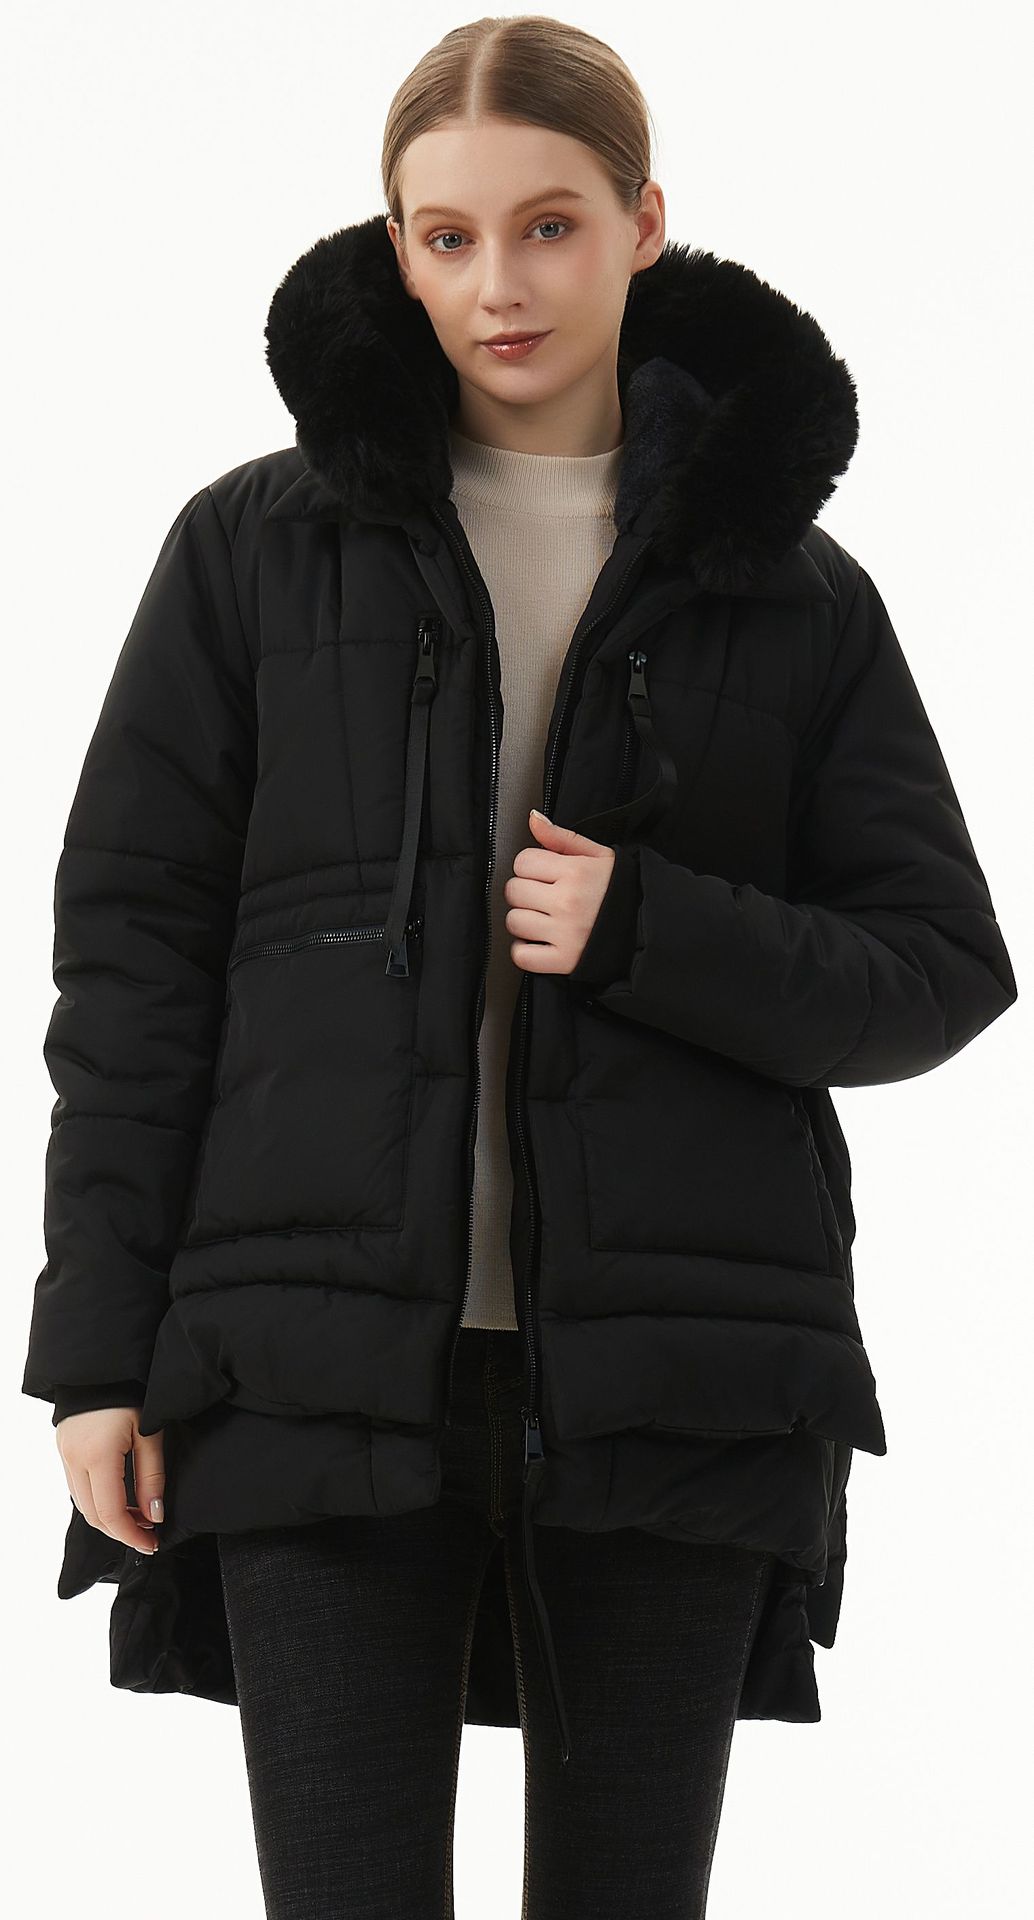 jackets  | Women's Casual Hooded Middle Long Cotton-padded Coat | |  | thecurvestory.myshopify.com